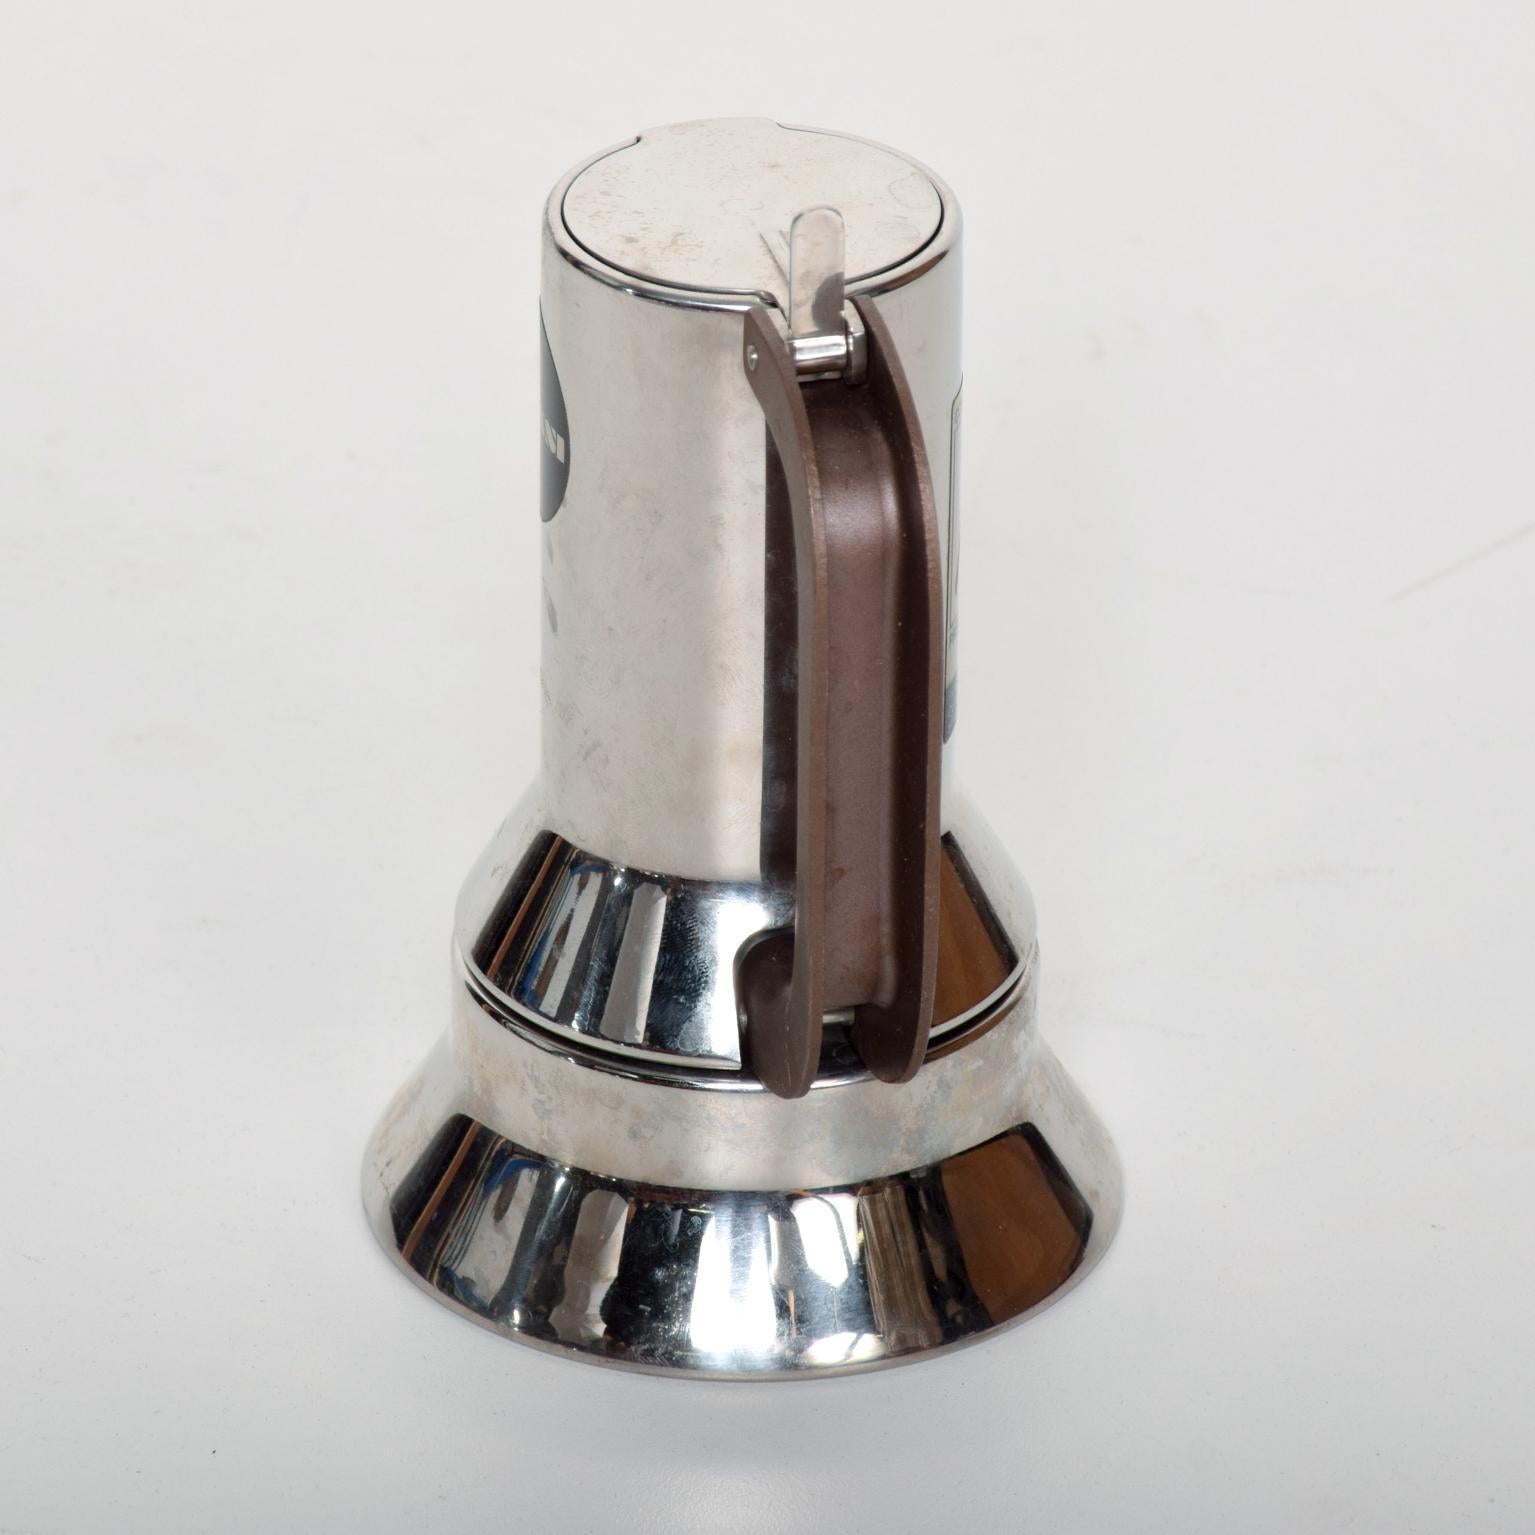 Late 20th Century Richard Sapper for Alessi, Coffee Expresso Maker, Midcentury Italian Modern